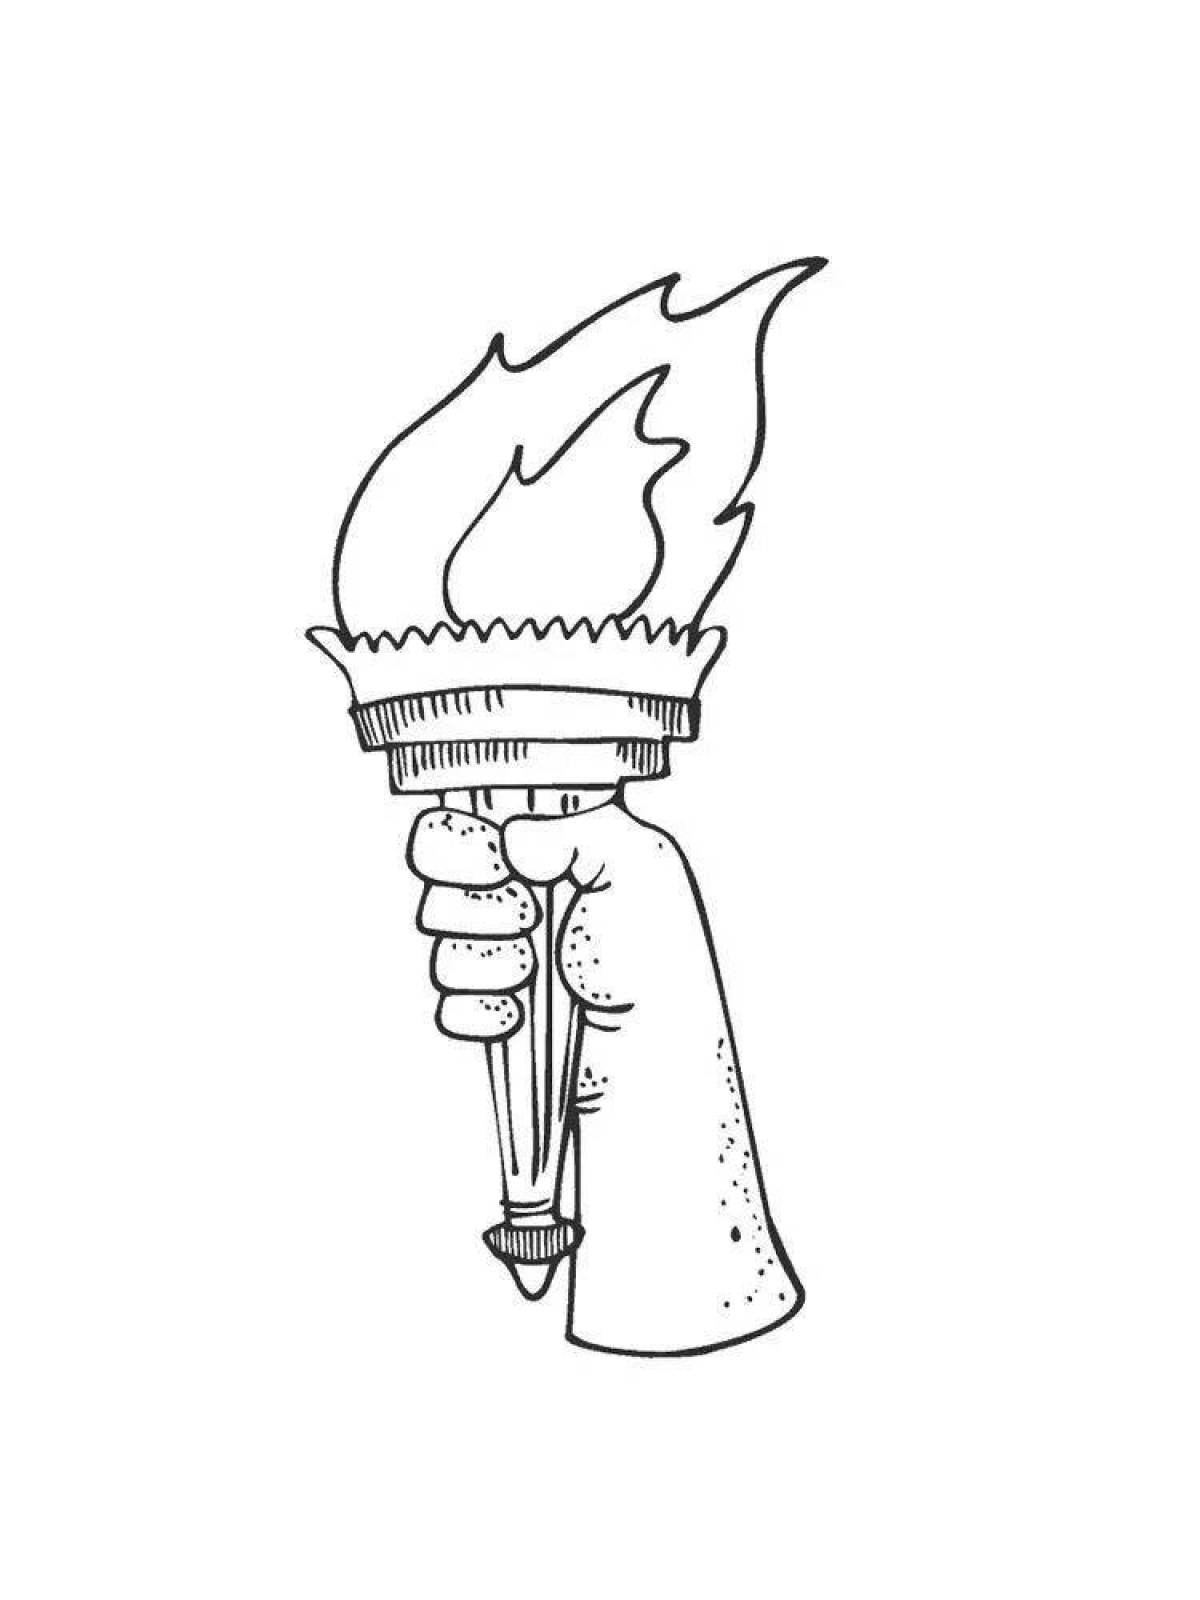 Great torch coloring page